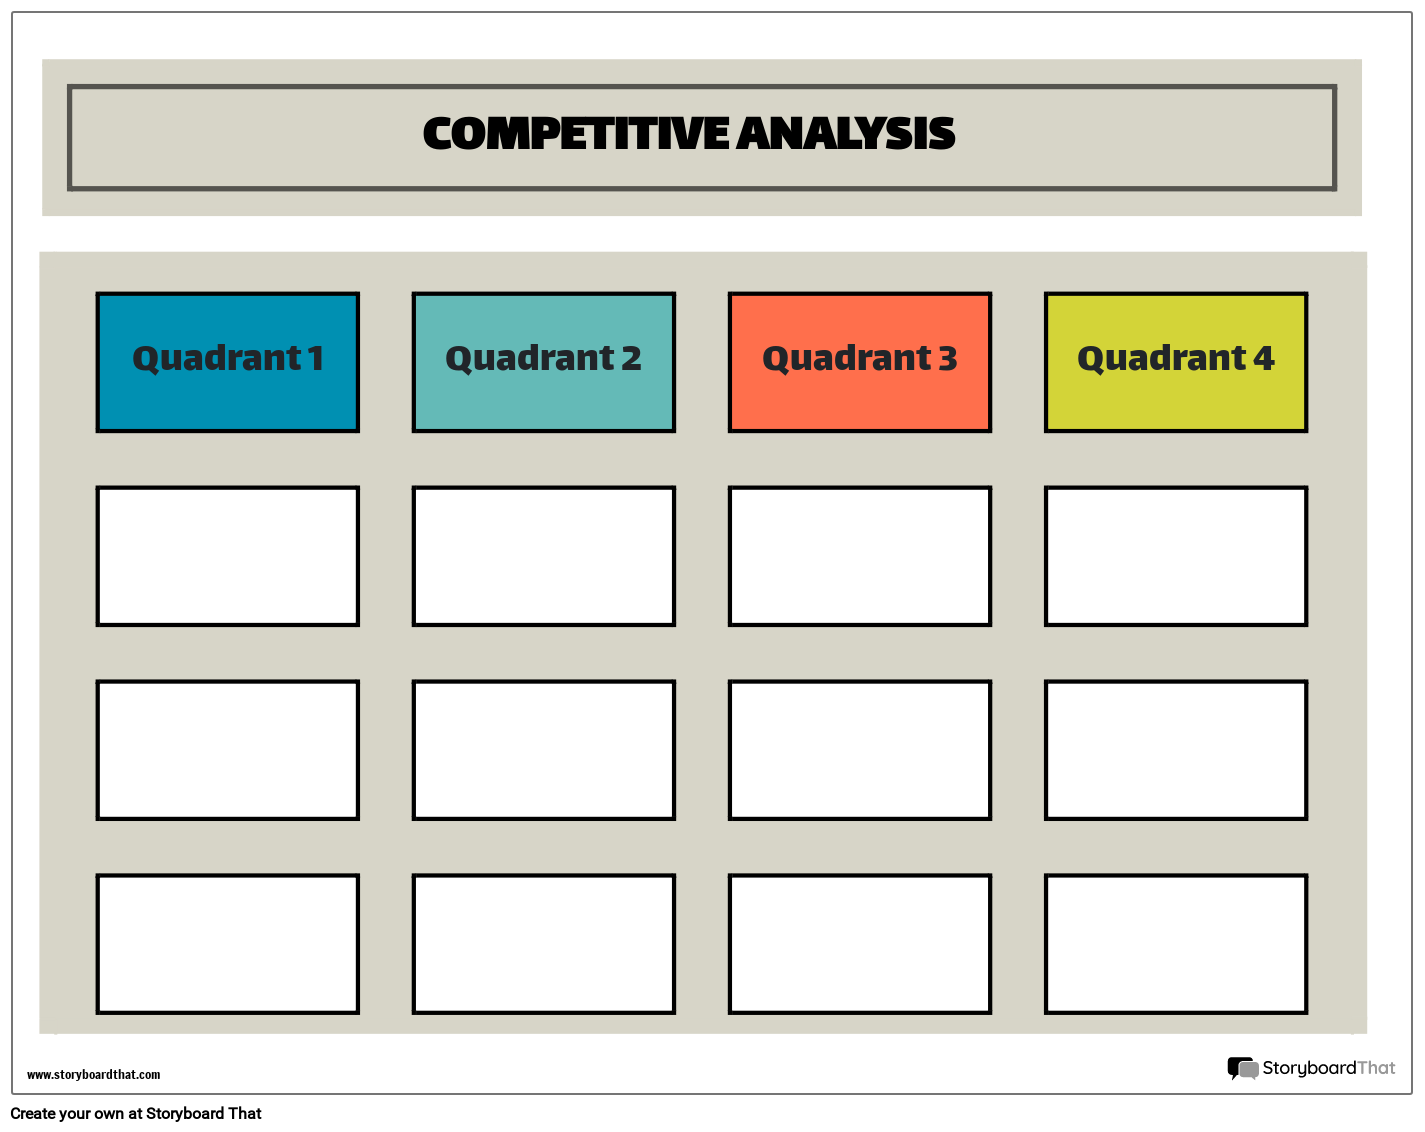 Competitive Analysis 2